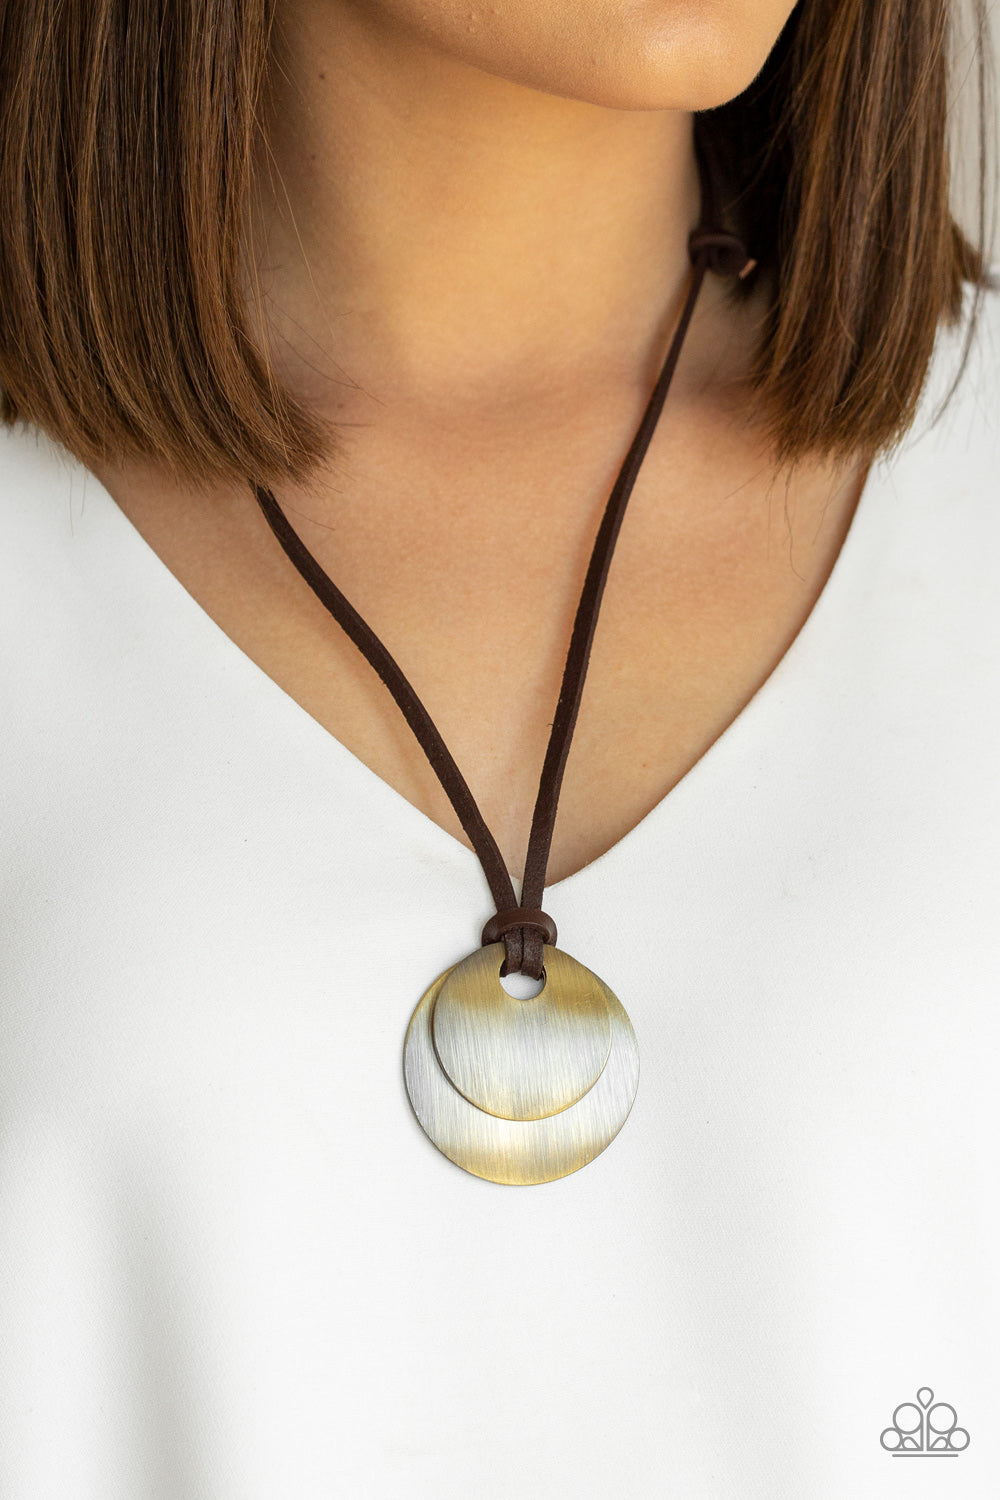 Clean Slate - Brass necklace